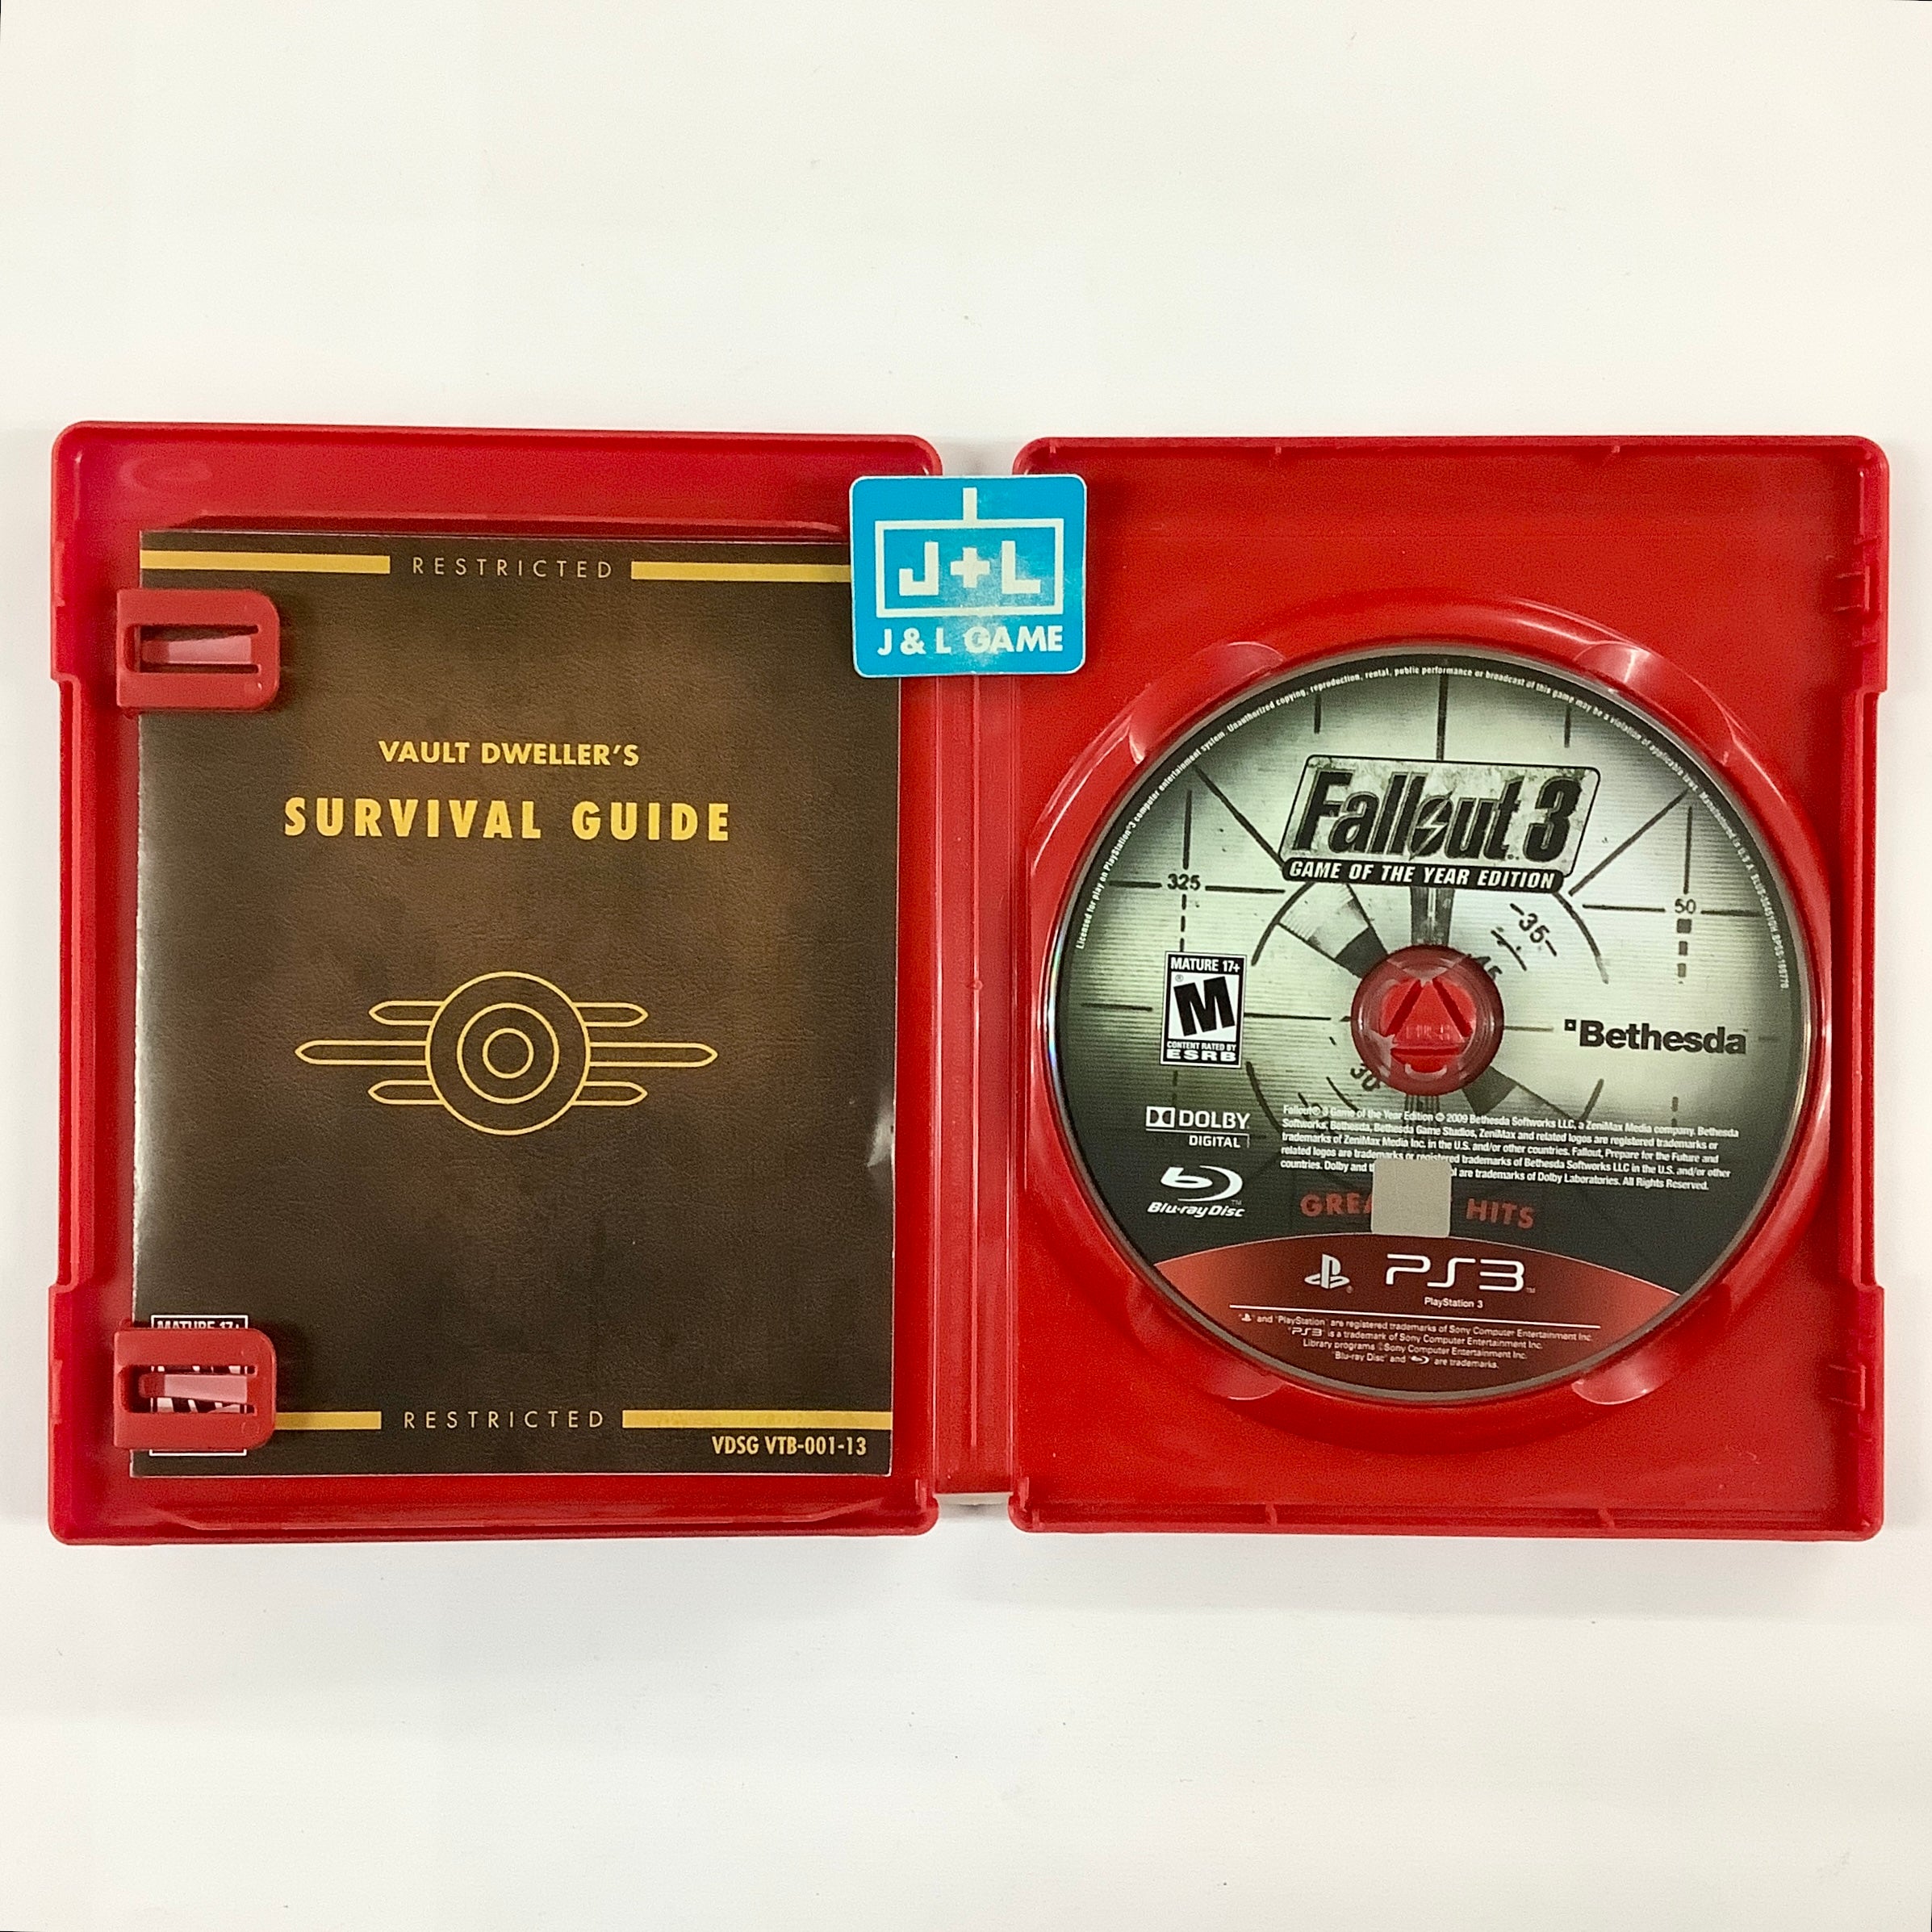 Fallout 3: Game of the Year Edition (Greatest Hits) (GameStop Exclusive) - (PS3) PlayStation 3 [Pre-Owned] Video Games Bethesda Softworks   